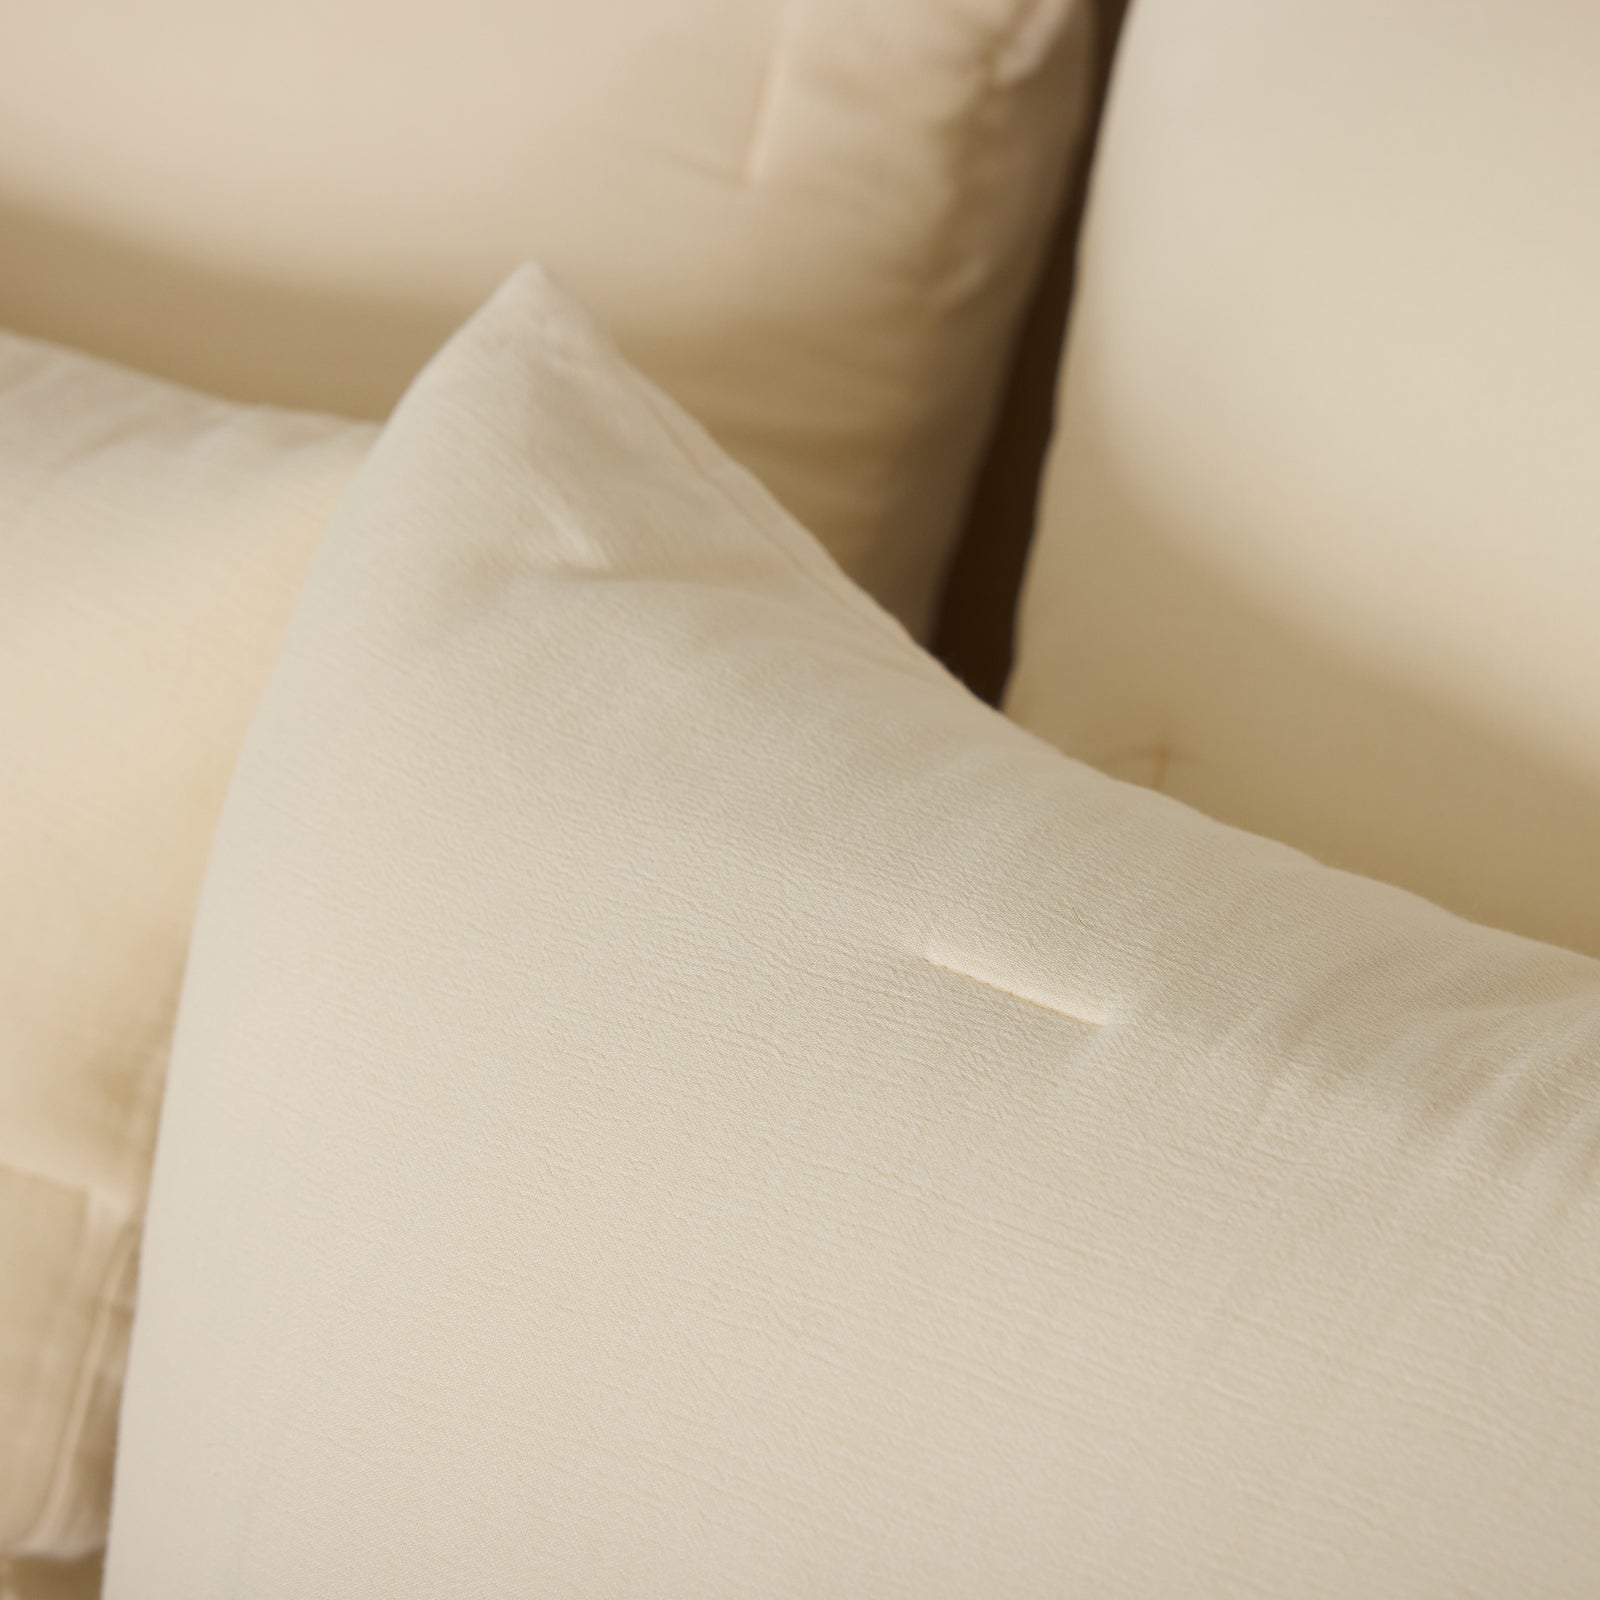 Close up of Buttermilk Aire Bamboo Puckered Shams. The shams are resting on a bed in a bedroom